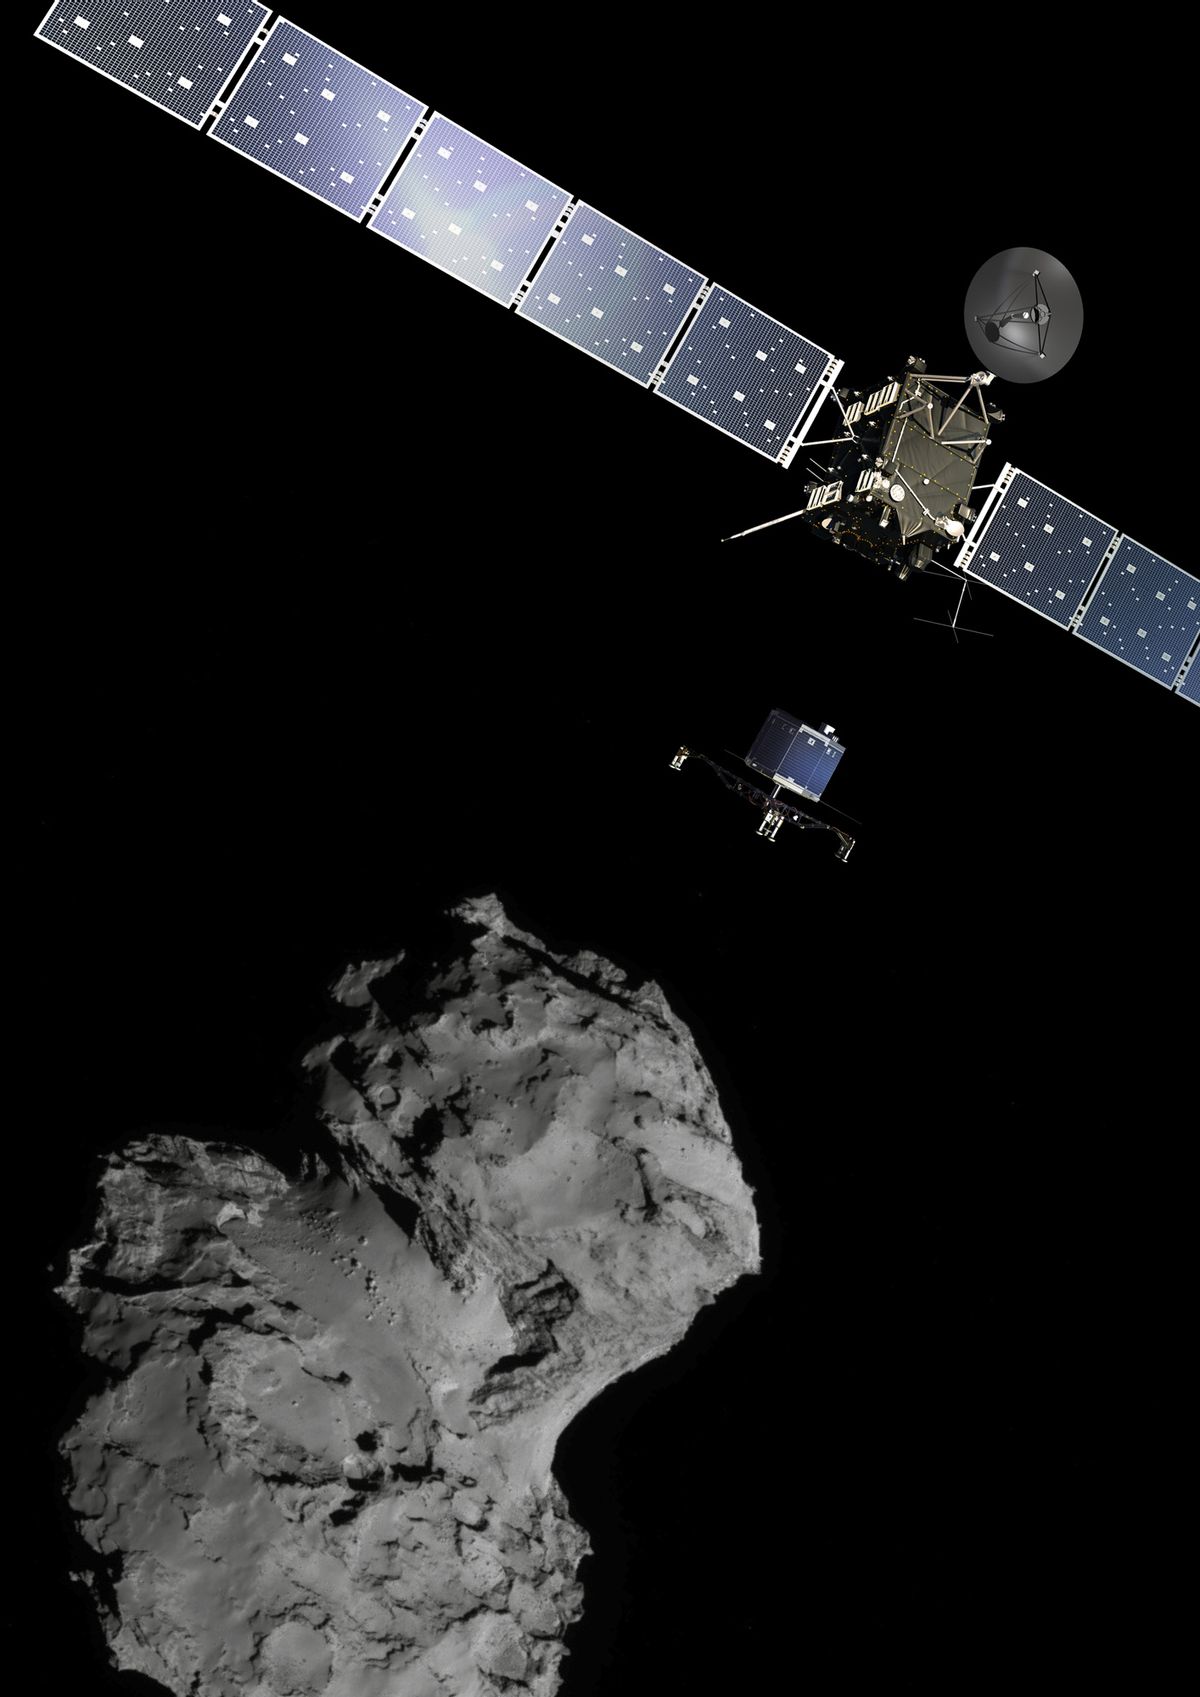 The picture released by the European Space Agency ESA shows the Rosetta mission poster which is a combination of various images to illustrate the deployment of the Philae lander to comet 67P/ChuryumovGerasimenko. from the Rosetta spacecraft.  The image of the comet was taken with the navigation camera on Rosetta. On Wednesday, Nov. 12,  2014 the Philae lander landed on the comet.   (AP Photo/ESA)